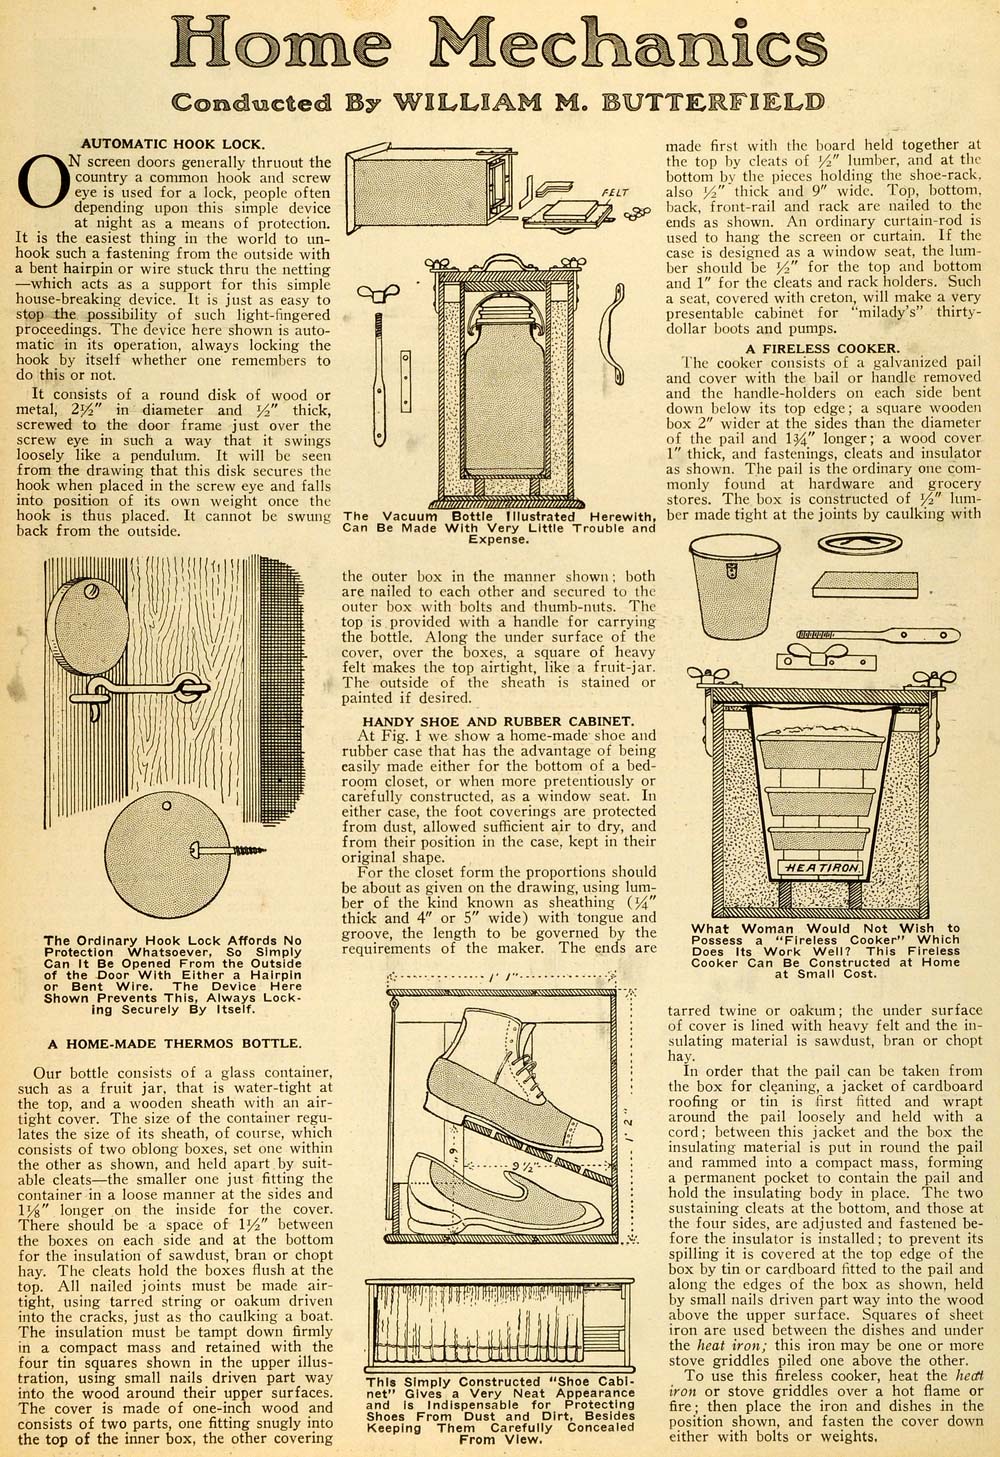 1920 Article Home Mechanics William Butterfield Thermos Bottle Shoe Cabinet SI1